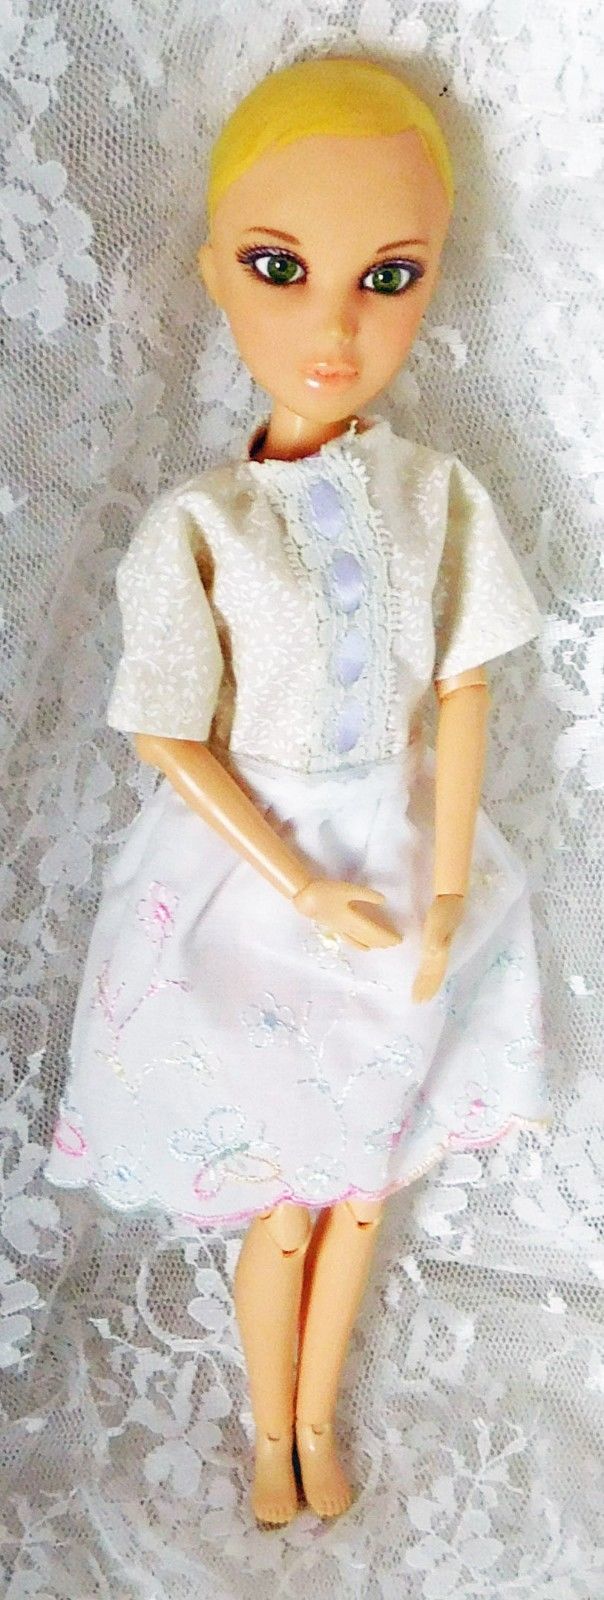 2009 Spin Master Ltd LIV 11 1/2" Doll #00621SWMG - Articulated - Handmade Outfit - £9.58 GBP